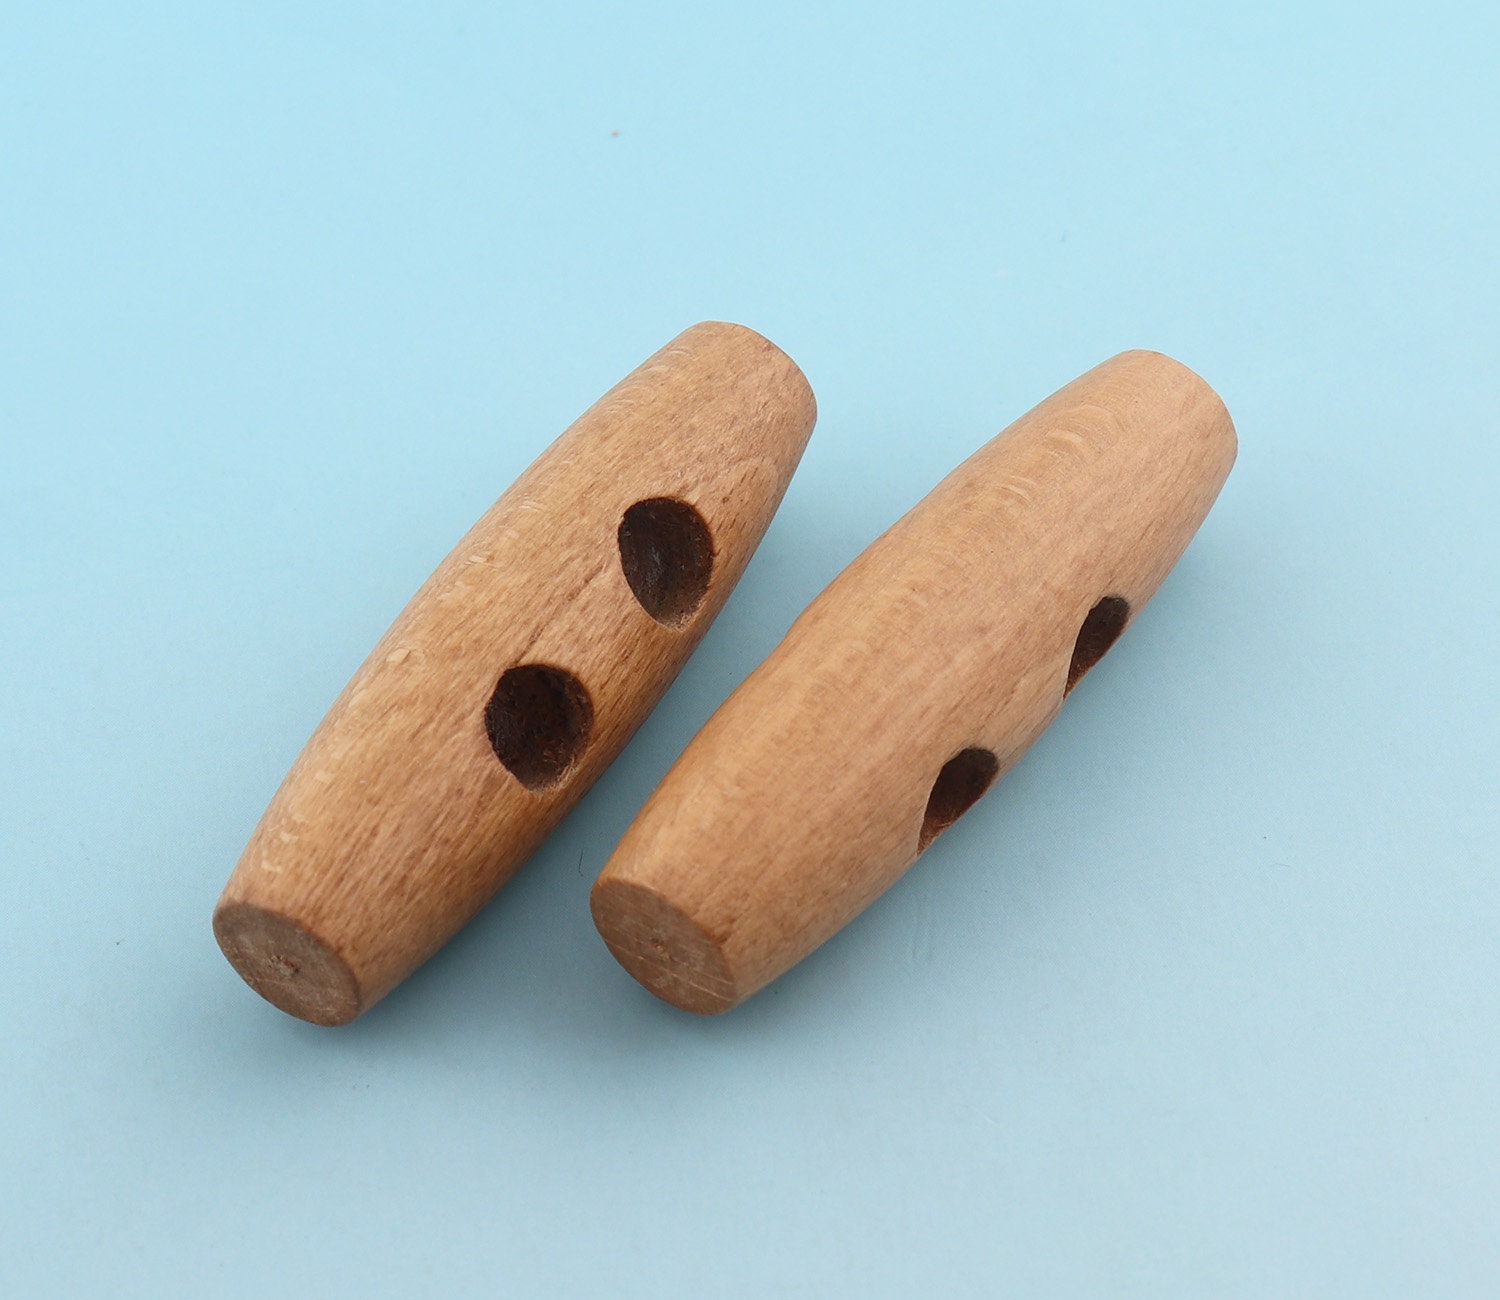 2 Holes 50mm High Quality Coat Toggle Buttons, High Quality 2 Holes 50mm  High Quality Coat Toggle Buttons on